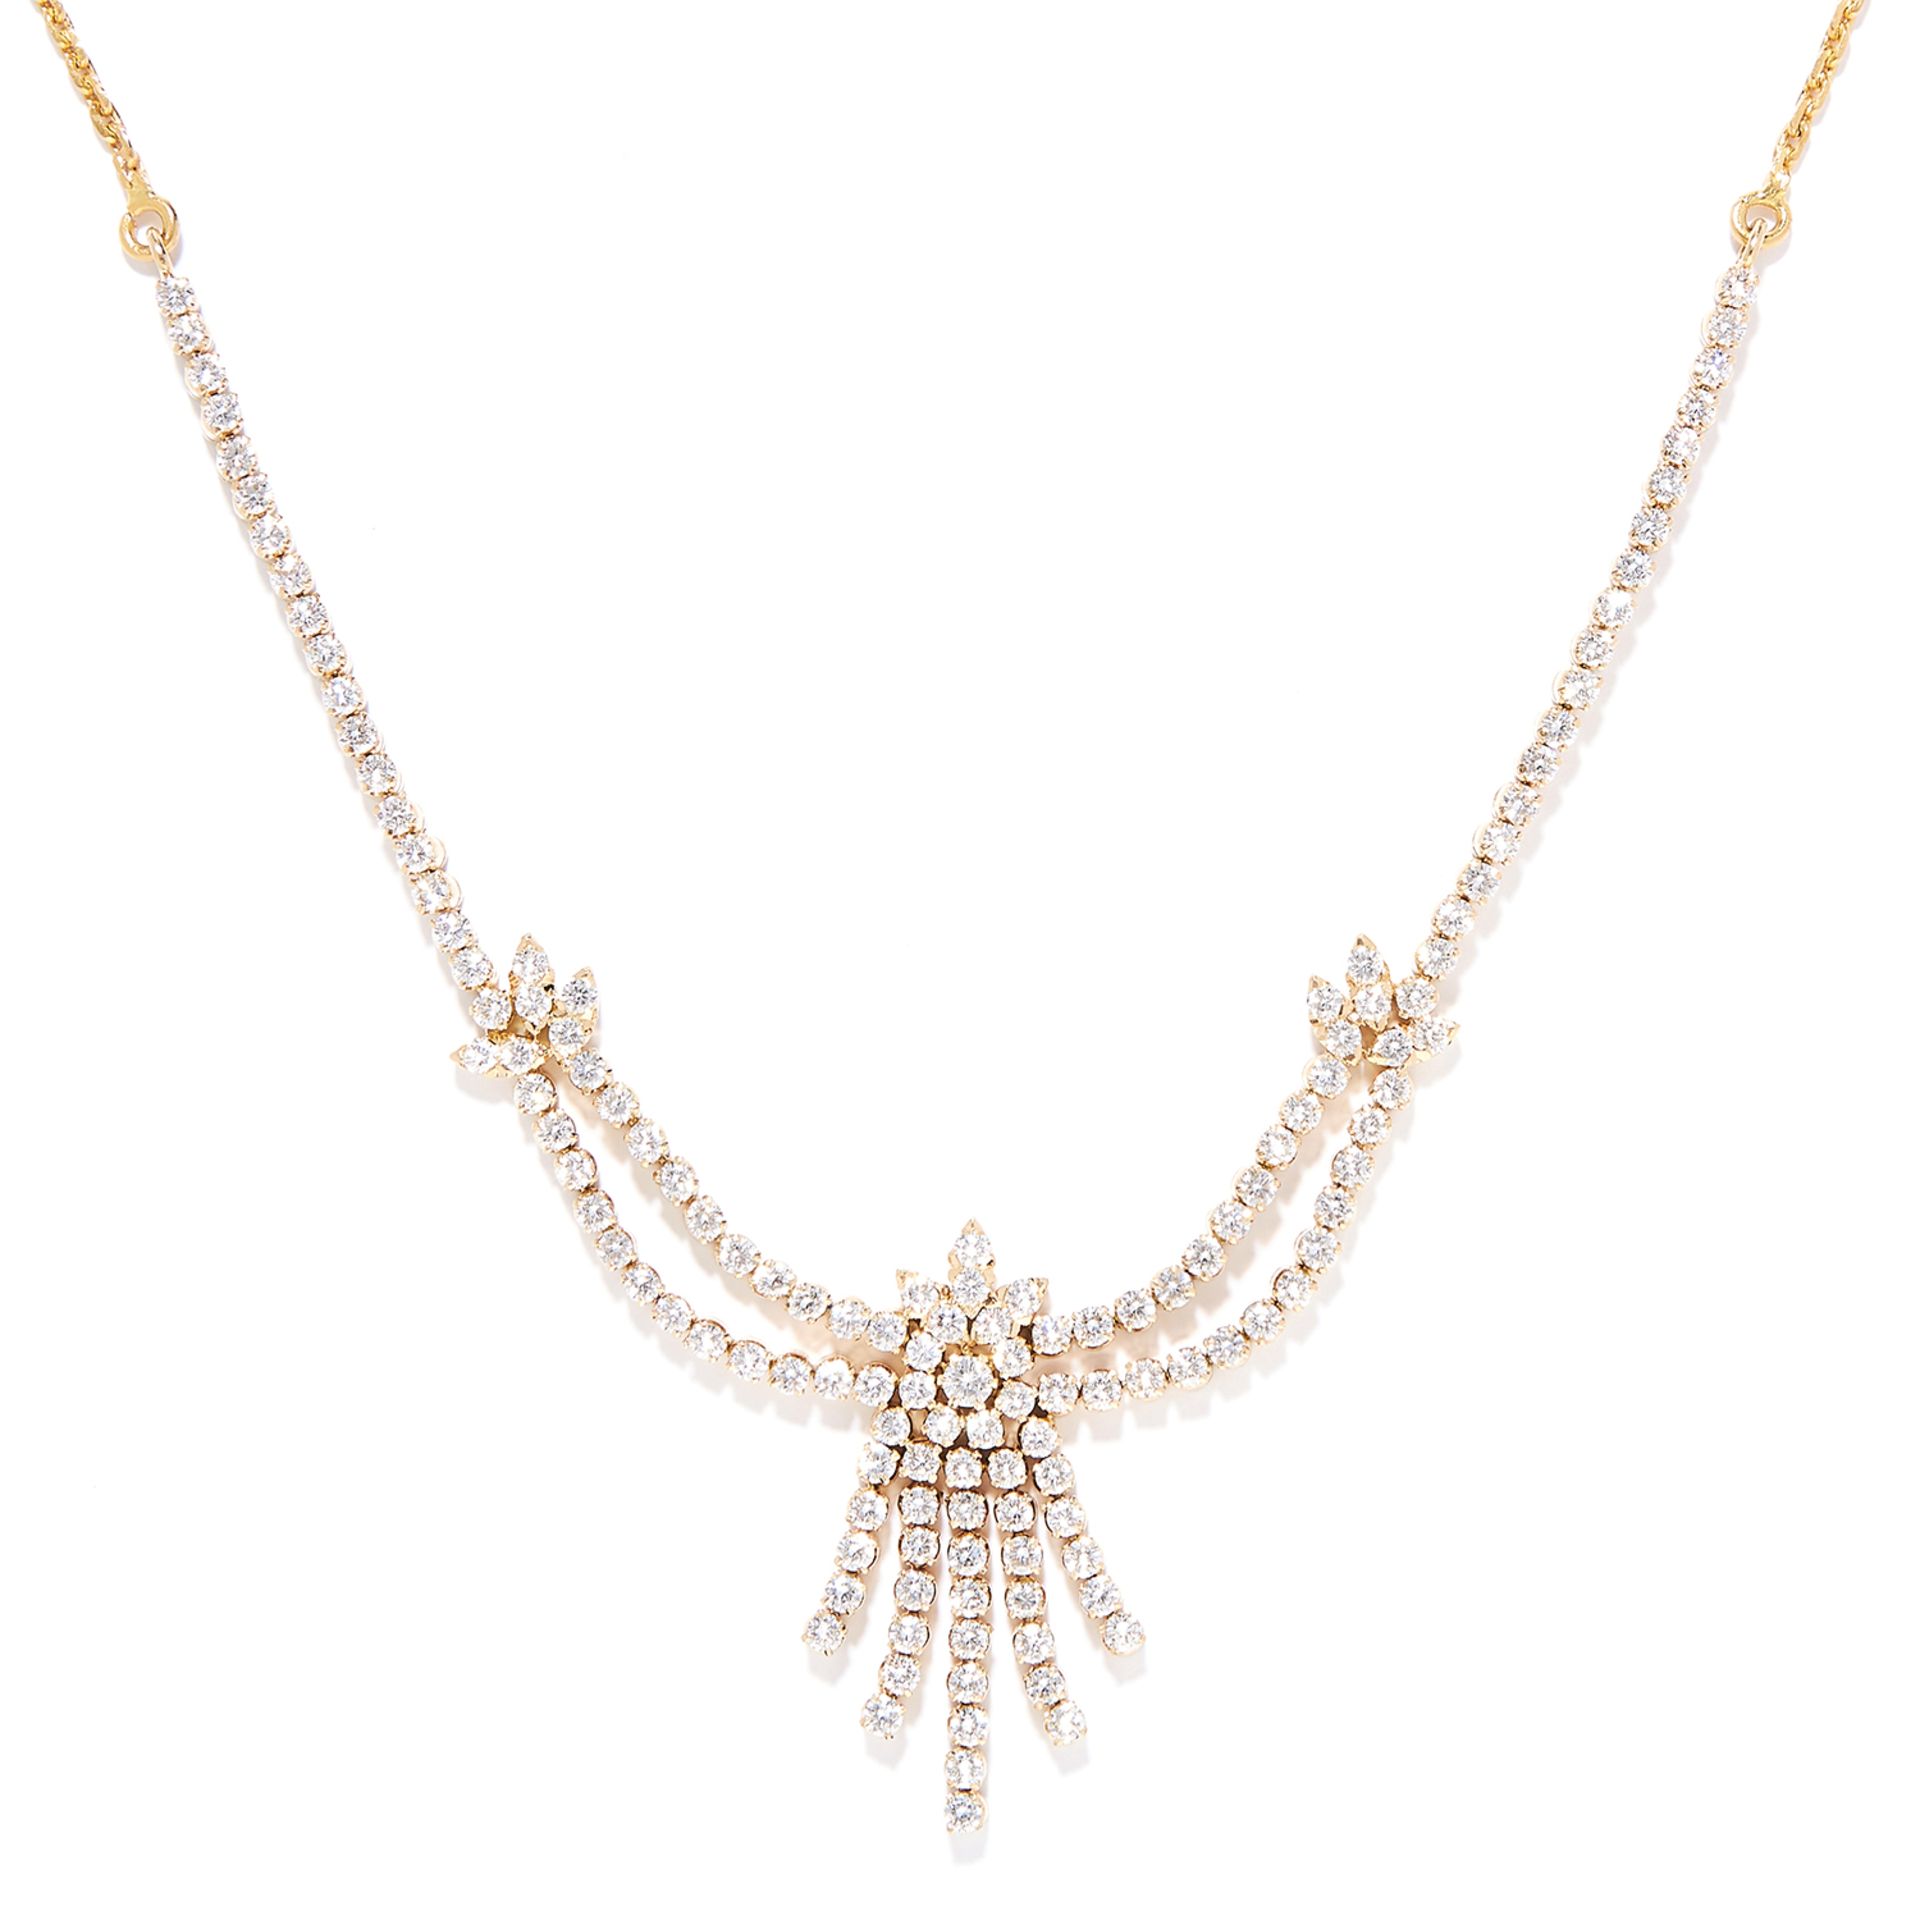 10.00 CARAT DIAMOND NECKLACE in 18ct yellow gold, set with a row of round cut diamonds, suspending